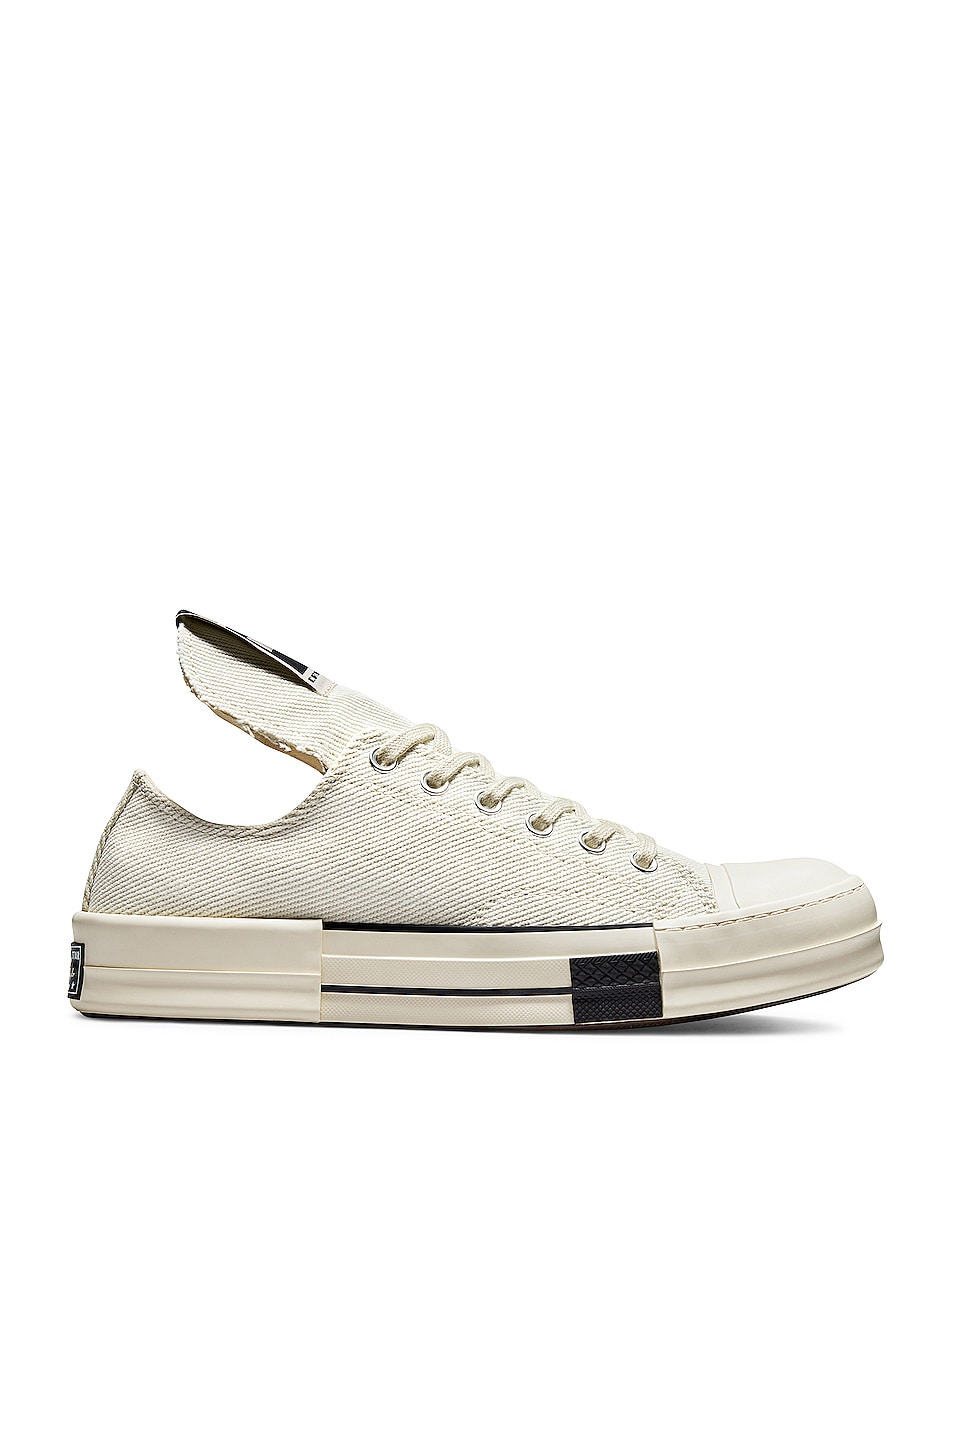 Image 1 of DRKSHDW by Rick Owens x Converse DRKSTAR OX in Lily White